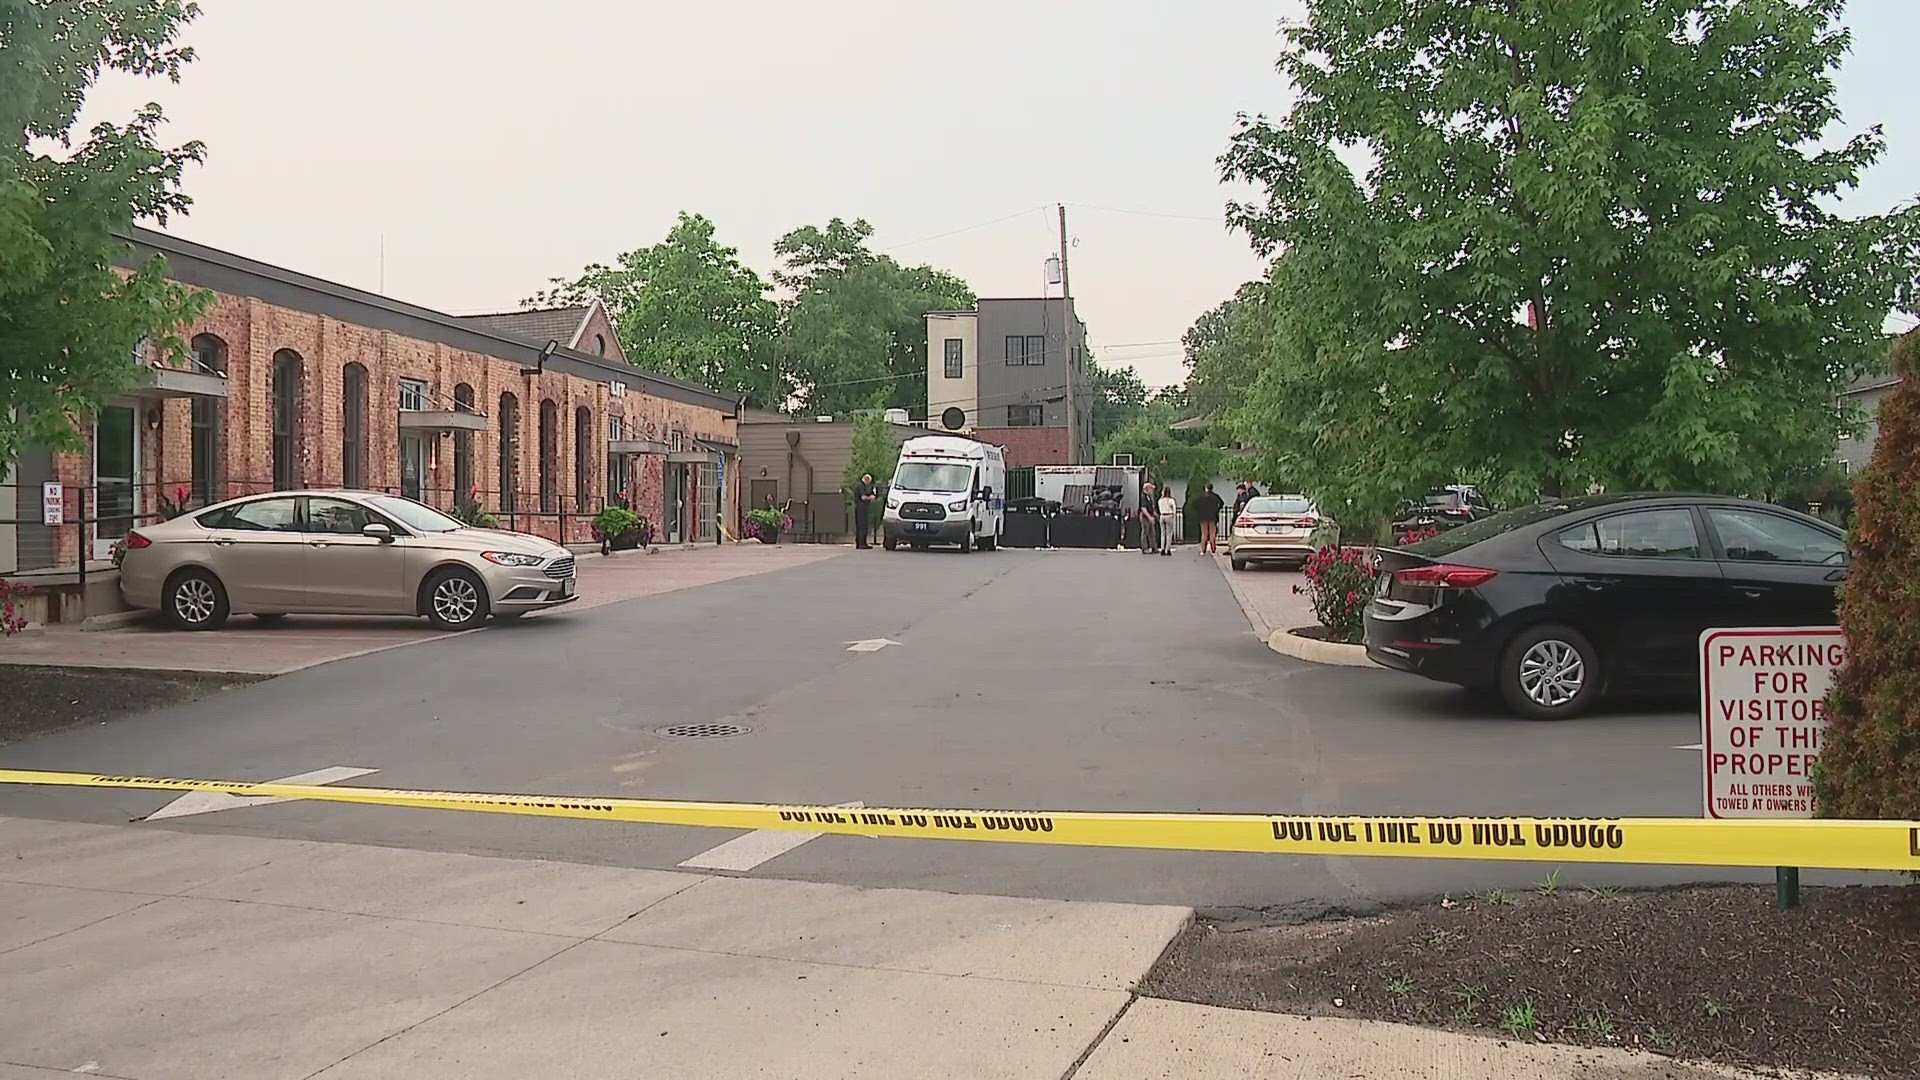 Police are asking for help identifying three people who may be involved in the death of a man who was found dead by a dumpster in the Italian Village Monday morning.